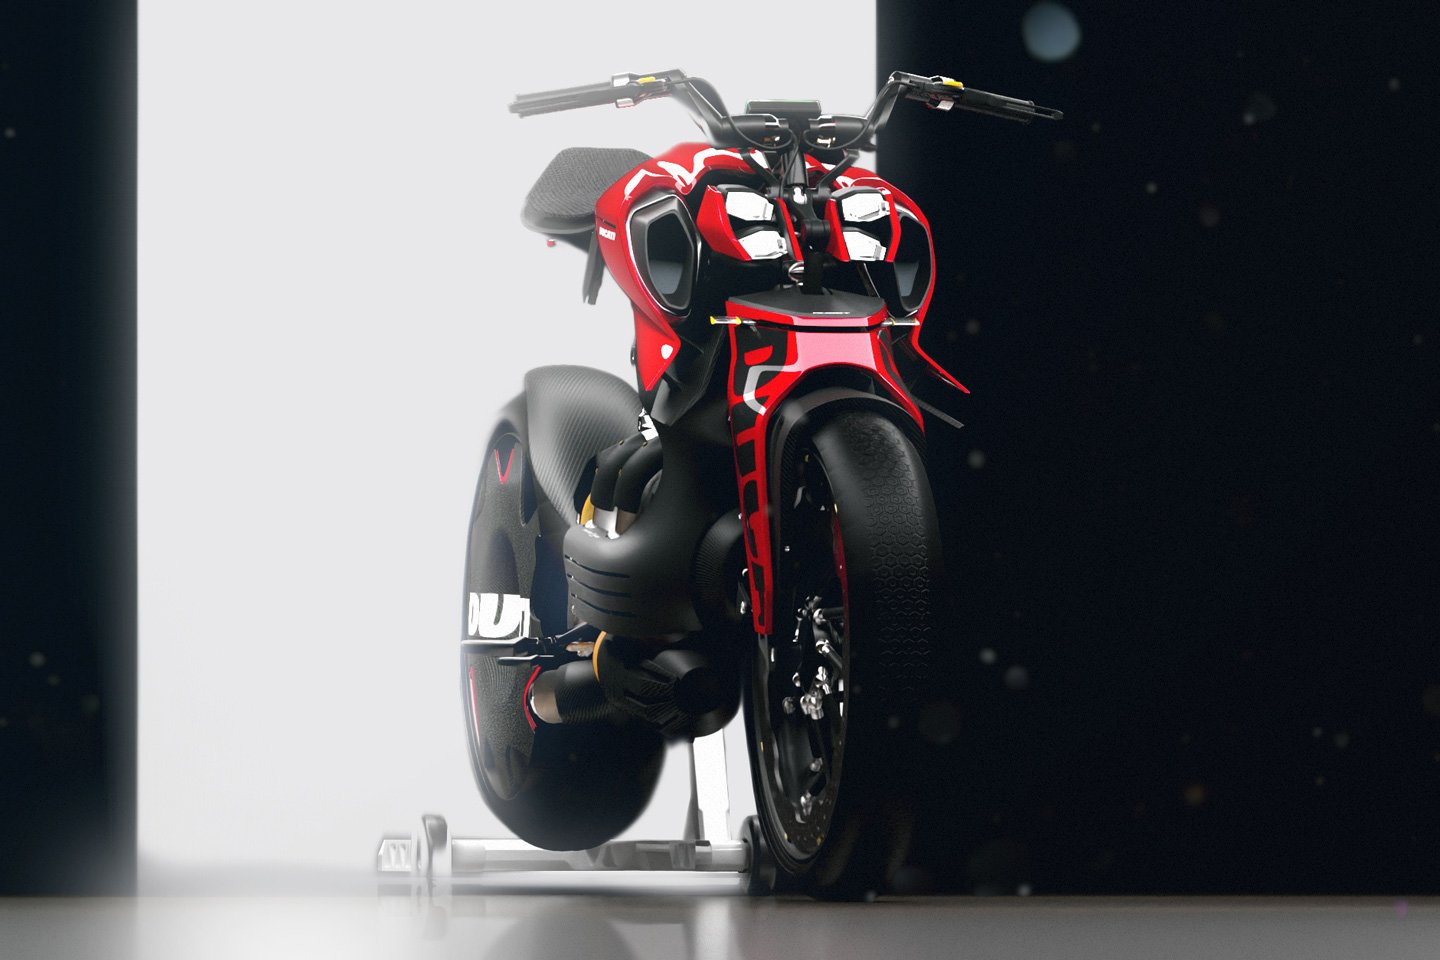 #Meet the Ducati Ghost, a hybrid racer that gives you the thrill of a hyperbike, but with lower emissions